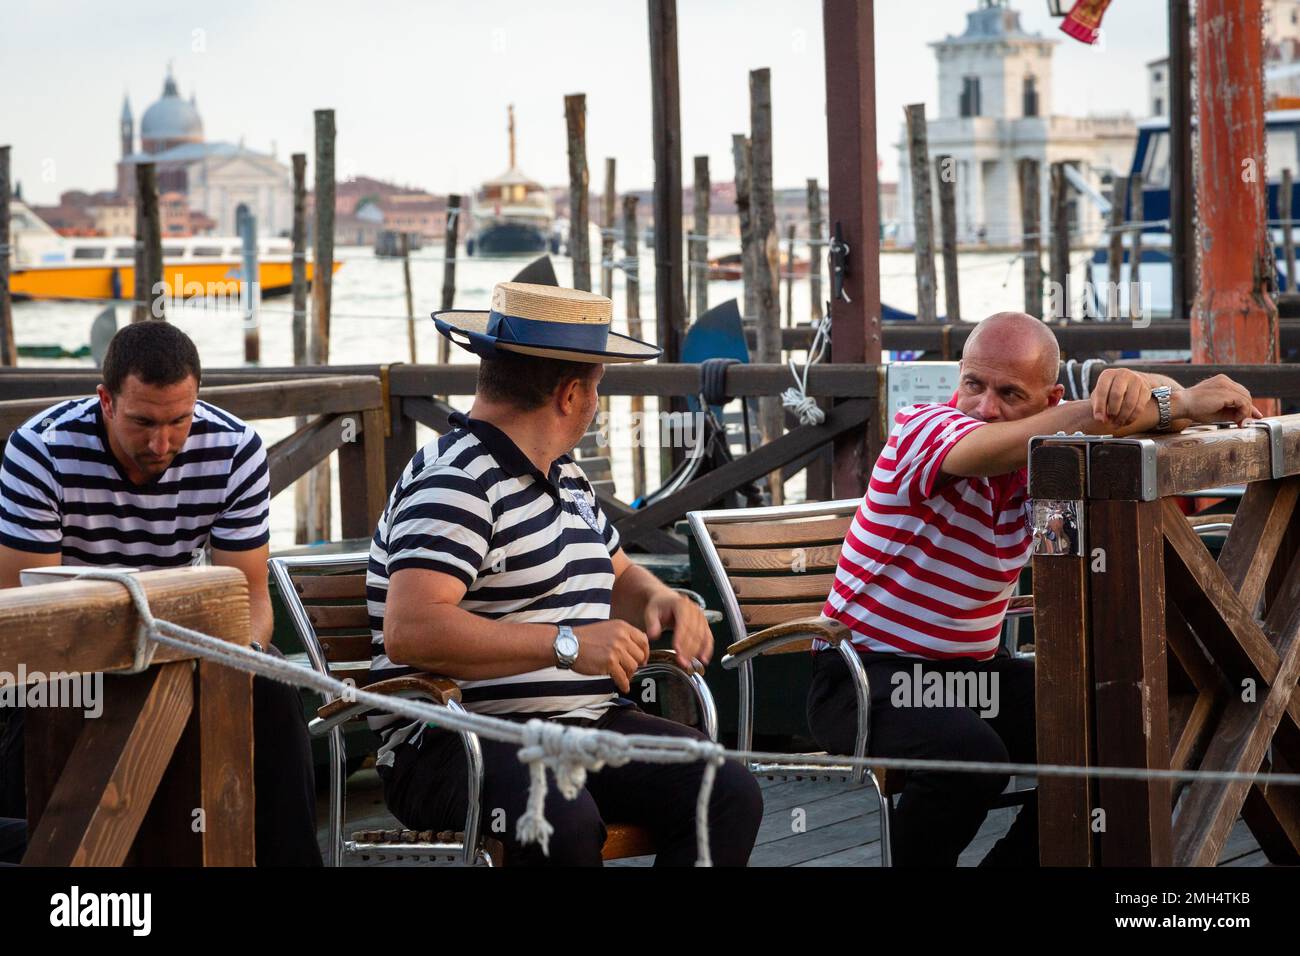 3 Gondoliers waiting for the next customers seated near the lagoon in Venice Stock Photo